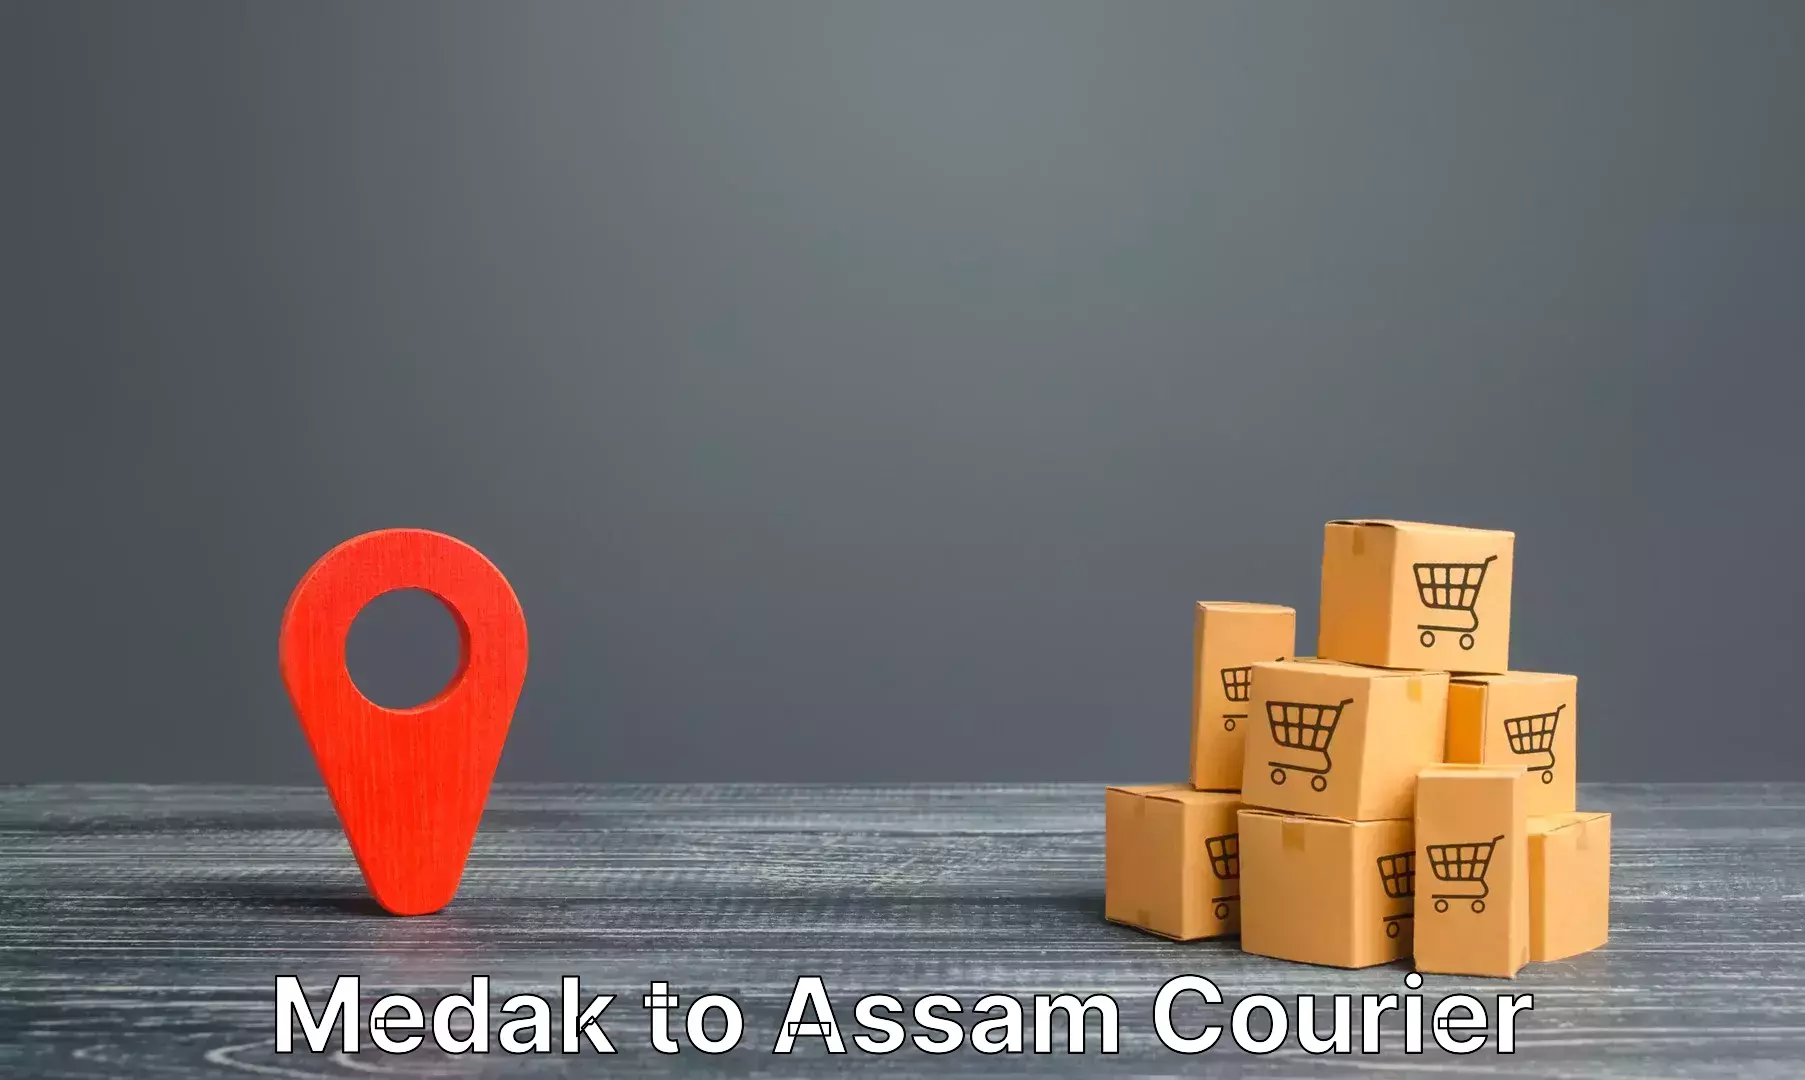 Luggage delivery network Medak to Assam